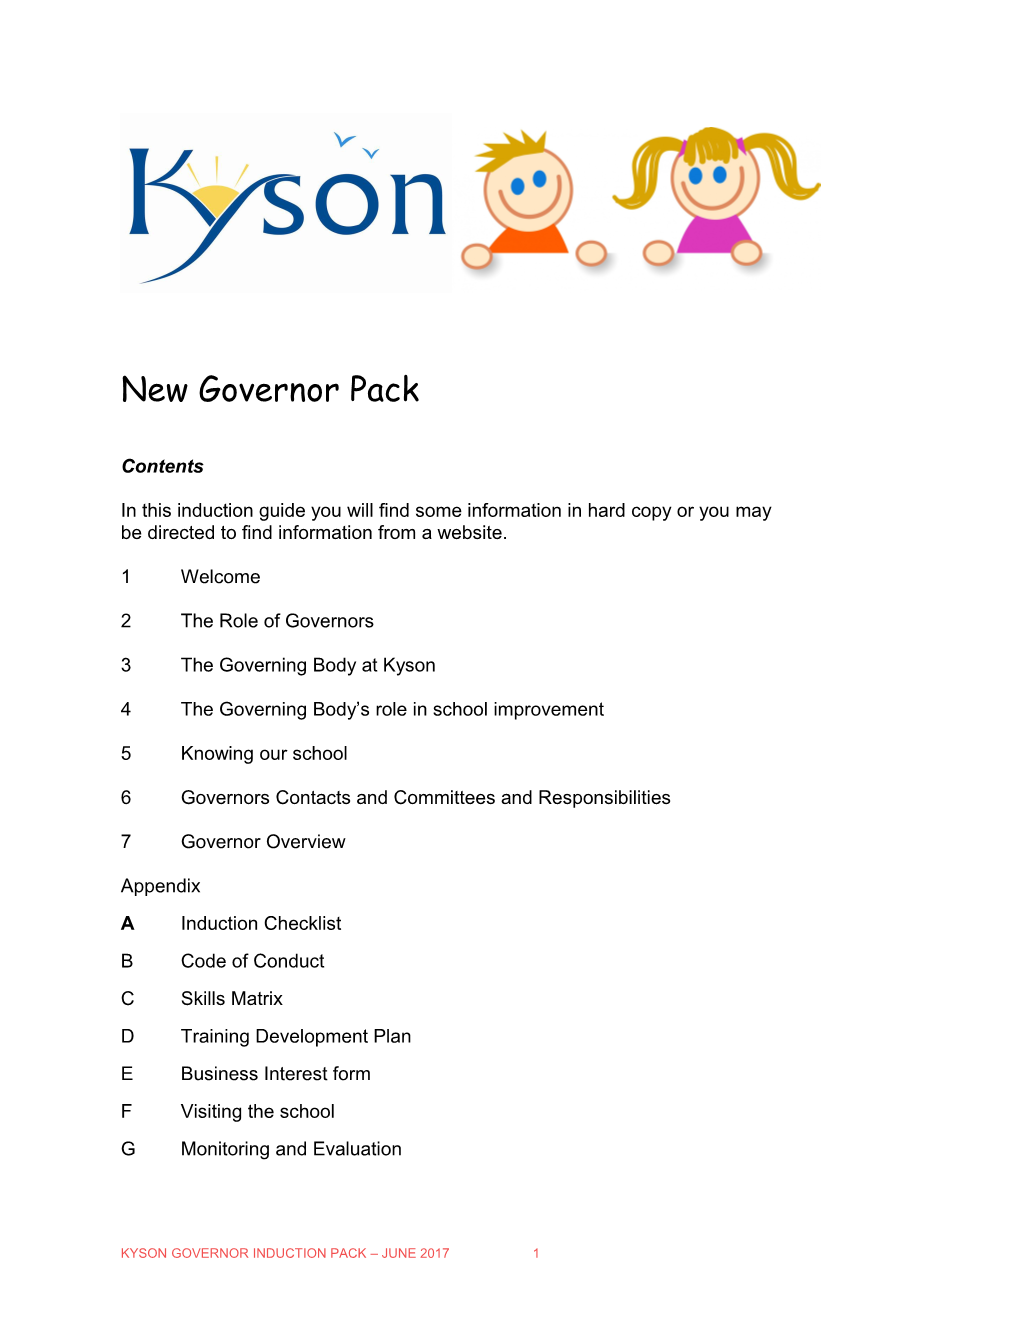 Kyson Governor Induction Pack